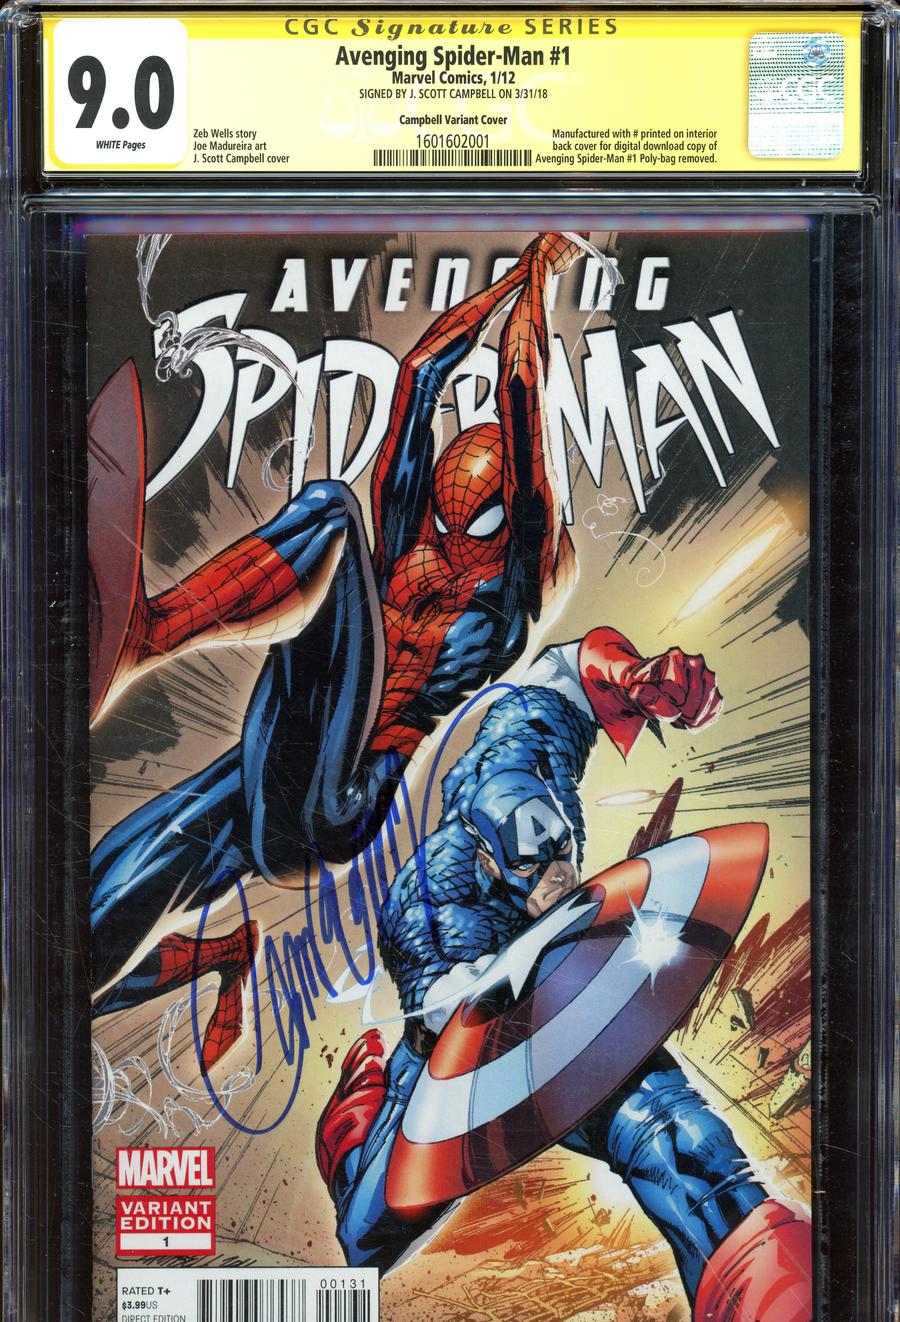 Avenging Spider-Man #1 Cover R Incentive J Scott Campbell Variant Cover Signed By J Scott Campbell CGC 9.0